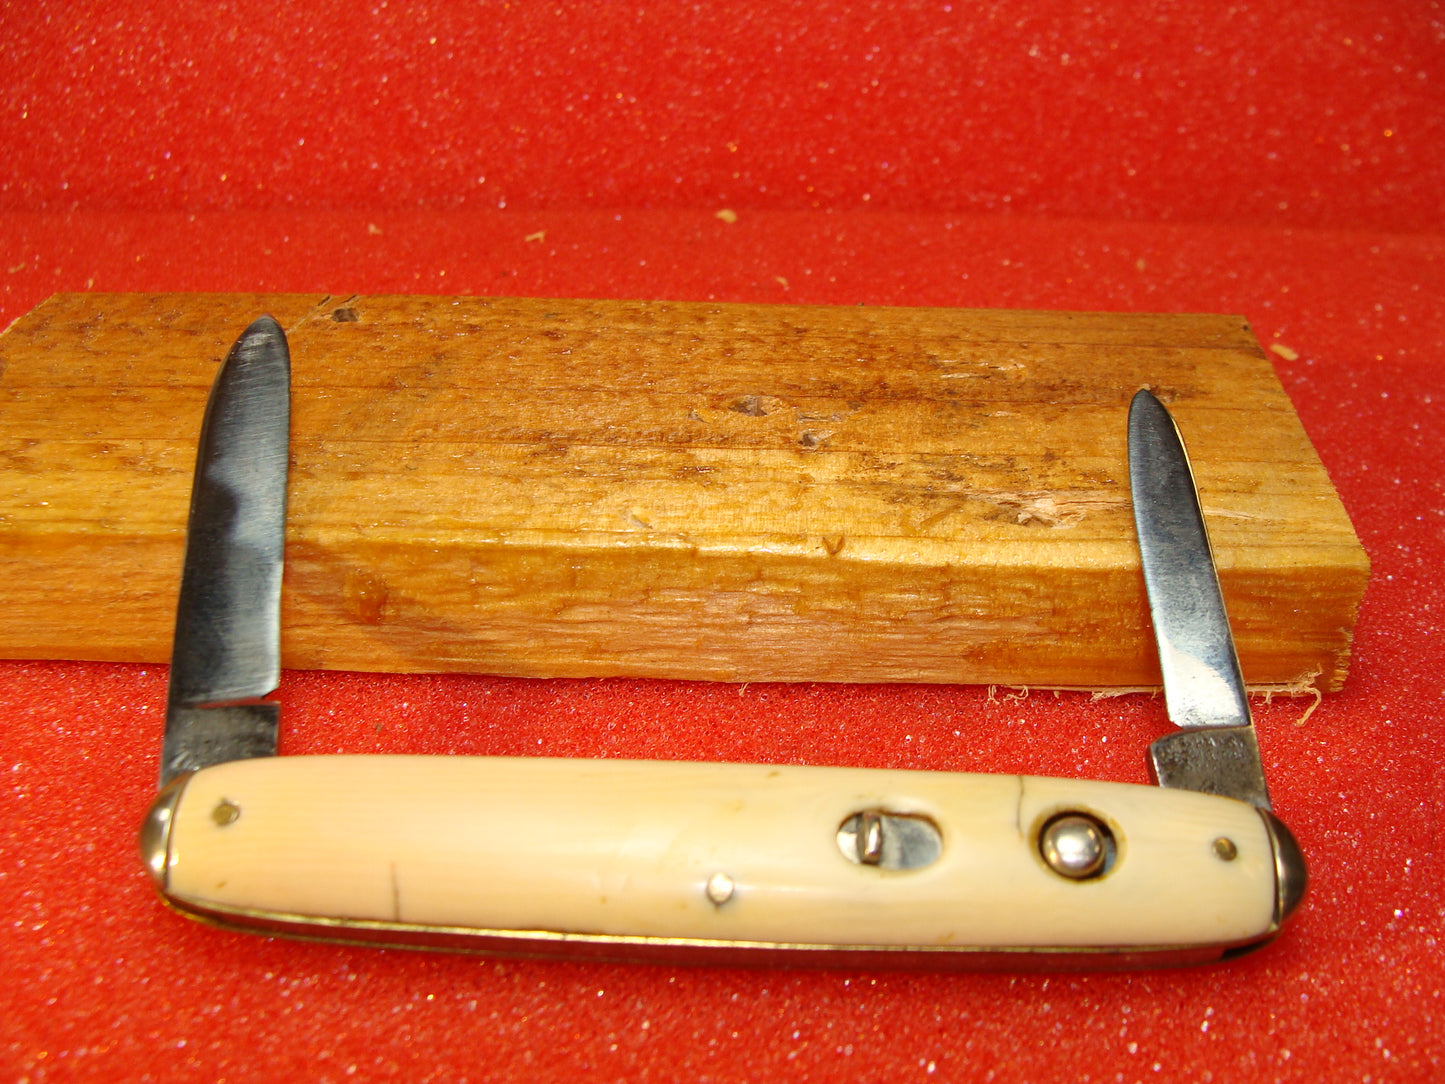 SHAPLEIGH HWD ST. LOUIS MO. DIAMOND EDGE 1910-16 VINTAGE AMERICAN AUTOMATIC KNIFE 3 3/8" DOUBLE BLADE SILVER TIP BOLSTERS IMITATION IVORY HANDLES